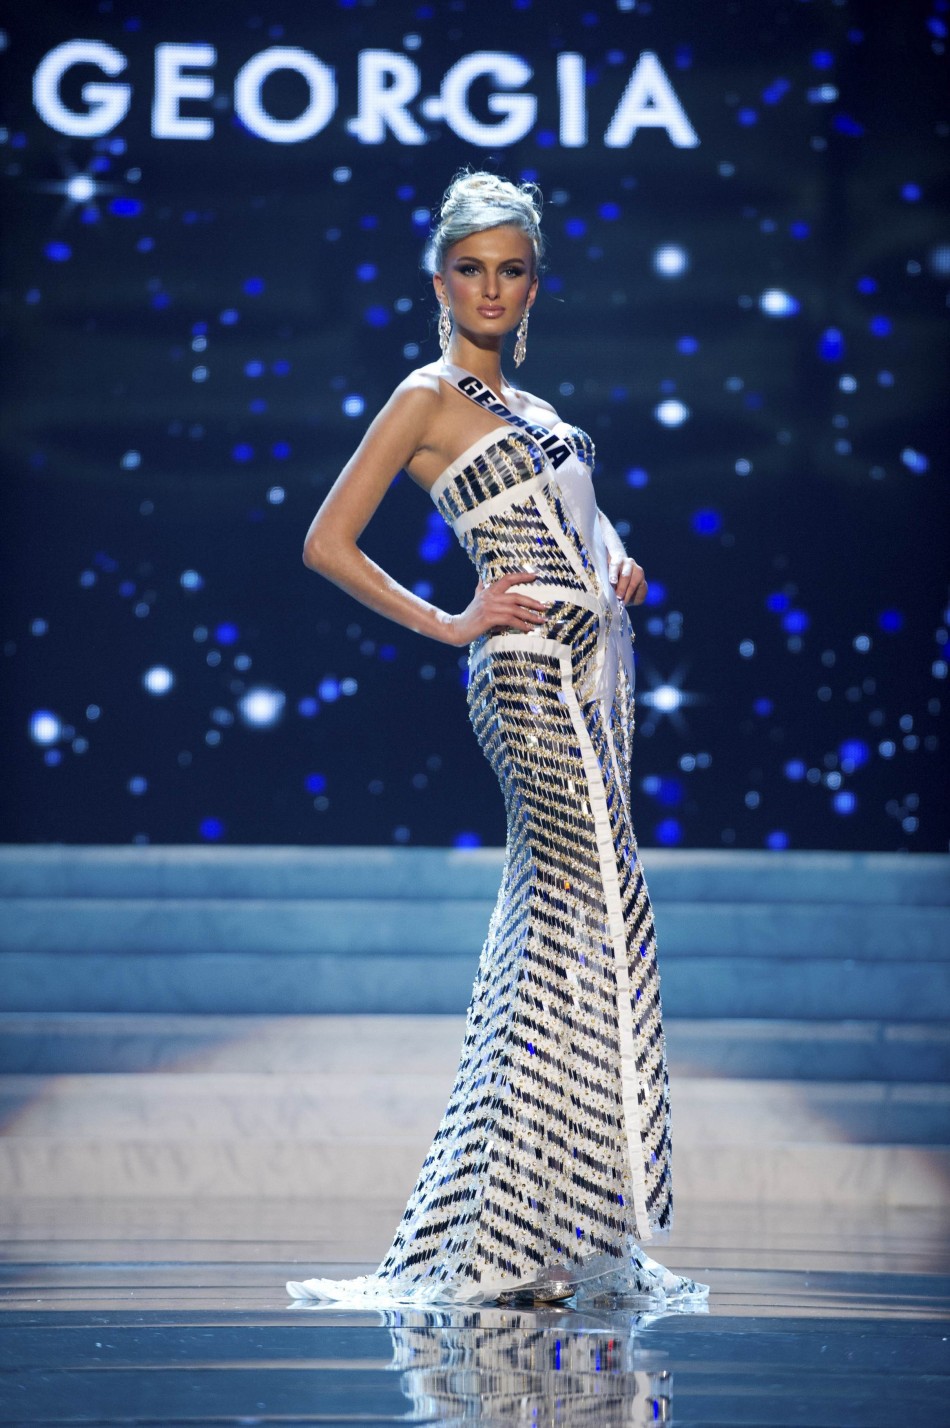 Miss Georgia 2012 Shedania competes in an evening gown of her choice during the Evening Gown Competition of the 2012 Miss Universe Presentation Show in Las Vegas